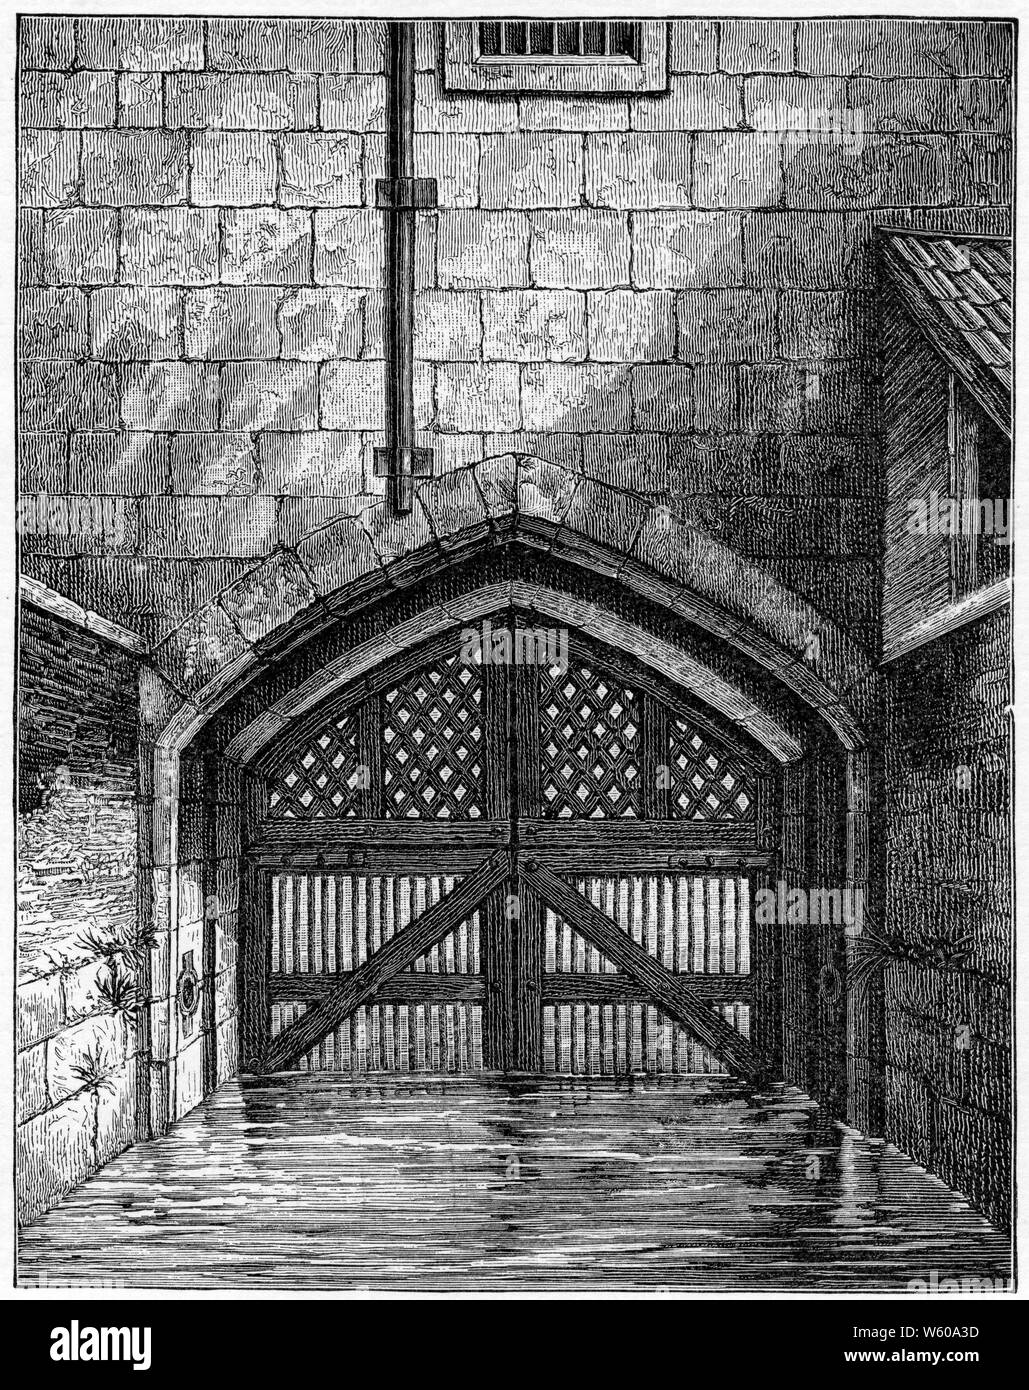 Traitors' Gate, Tower of London, London, c1801. After a drawing by C Tomkins, 1801. The Traitors' Gate is an entrance through which many prisoners of the House of Tudor entered the Tower of London. The gate was built by Edward I, to provide a water gate entrance to the Tower and is part of St. Thomas's Tower. Stock Photo